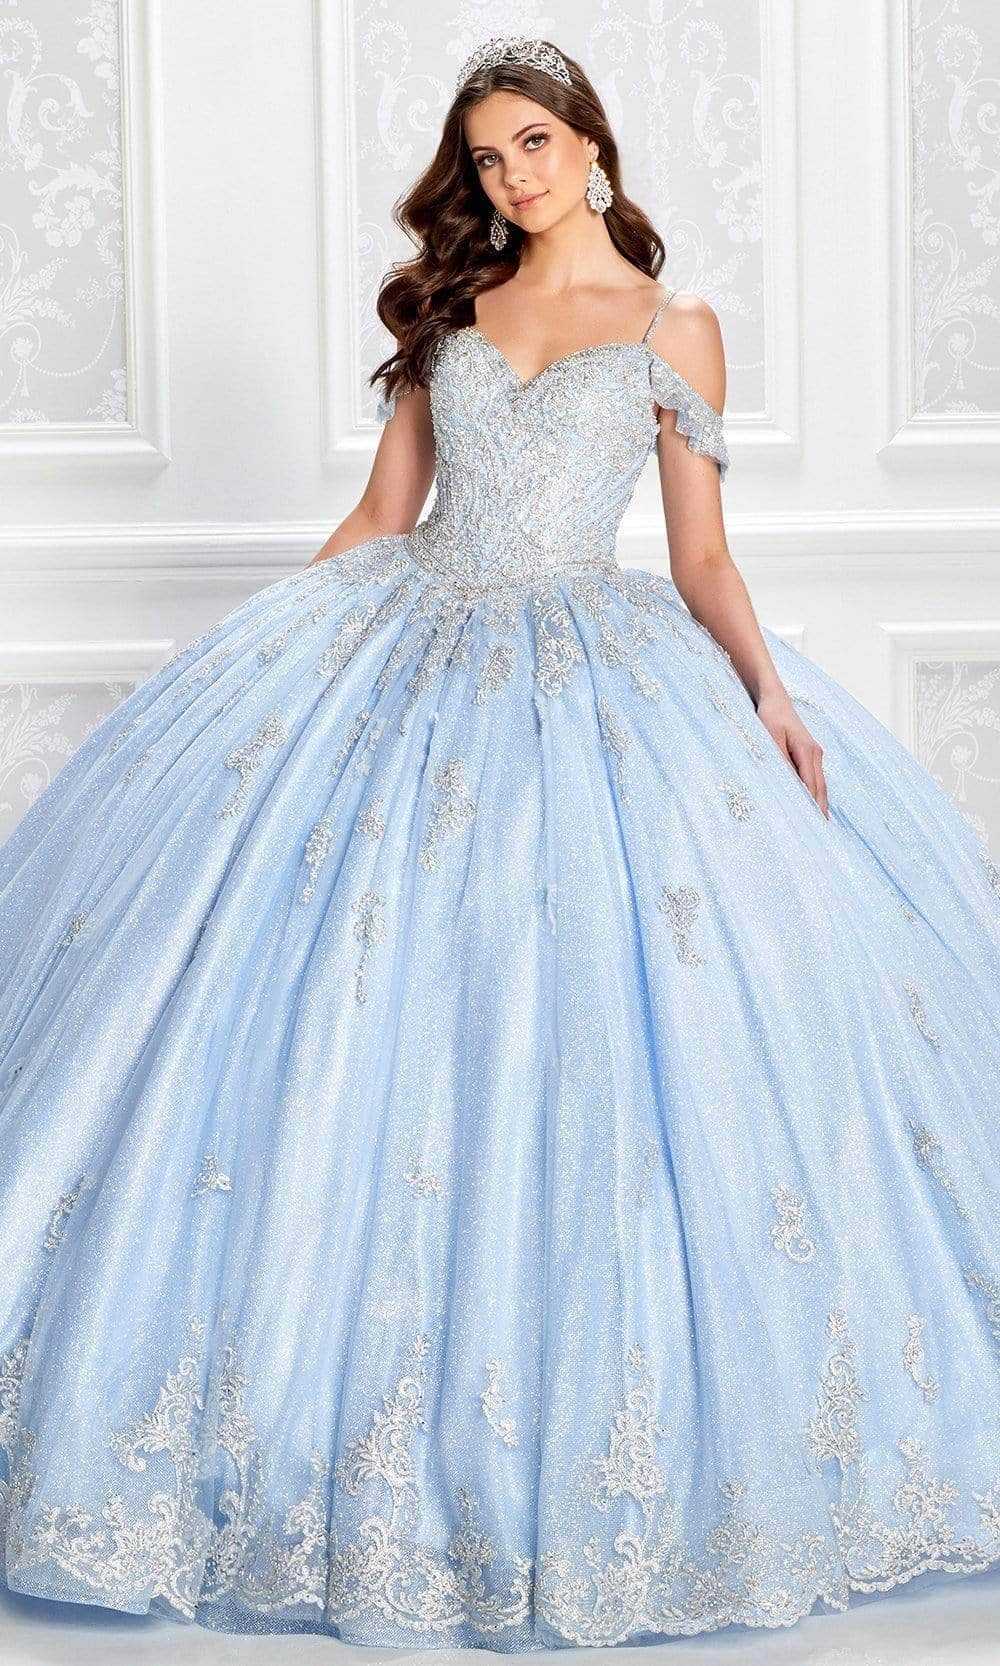 Princesa by Ariana Vara, Princesa by Ariana Vara - PR22032 Lace Style Ball Gown